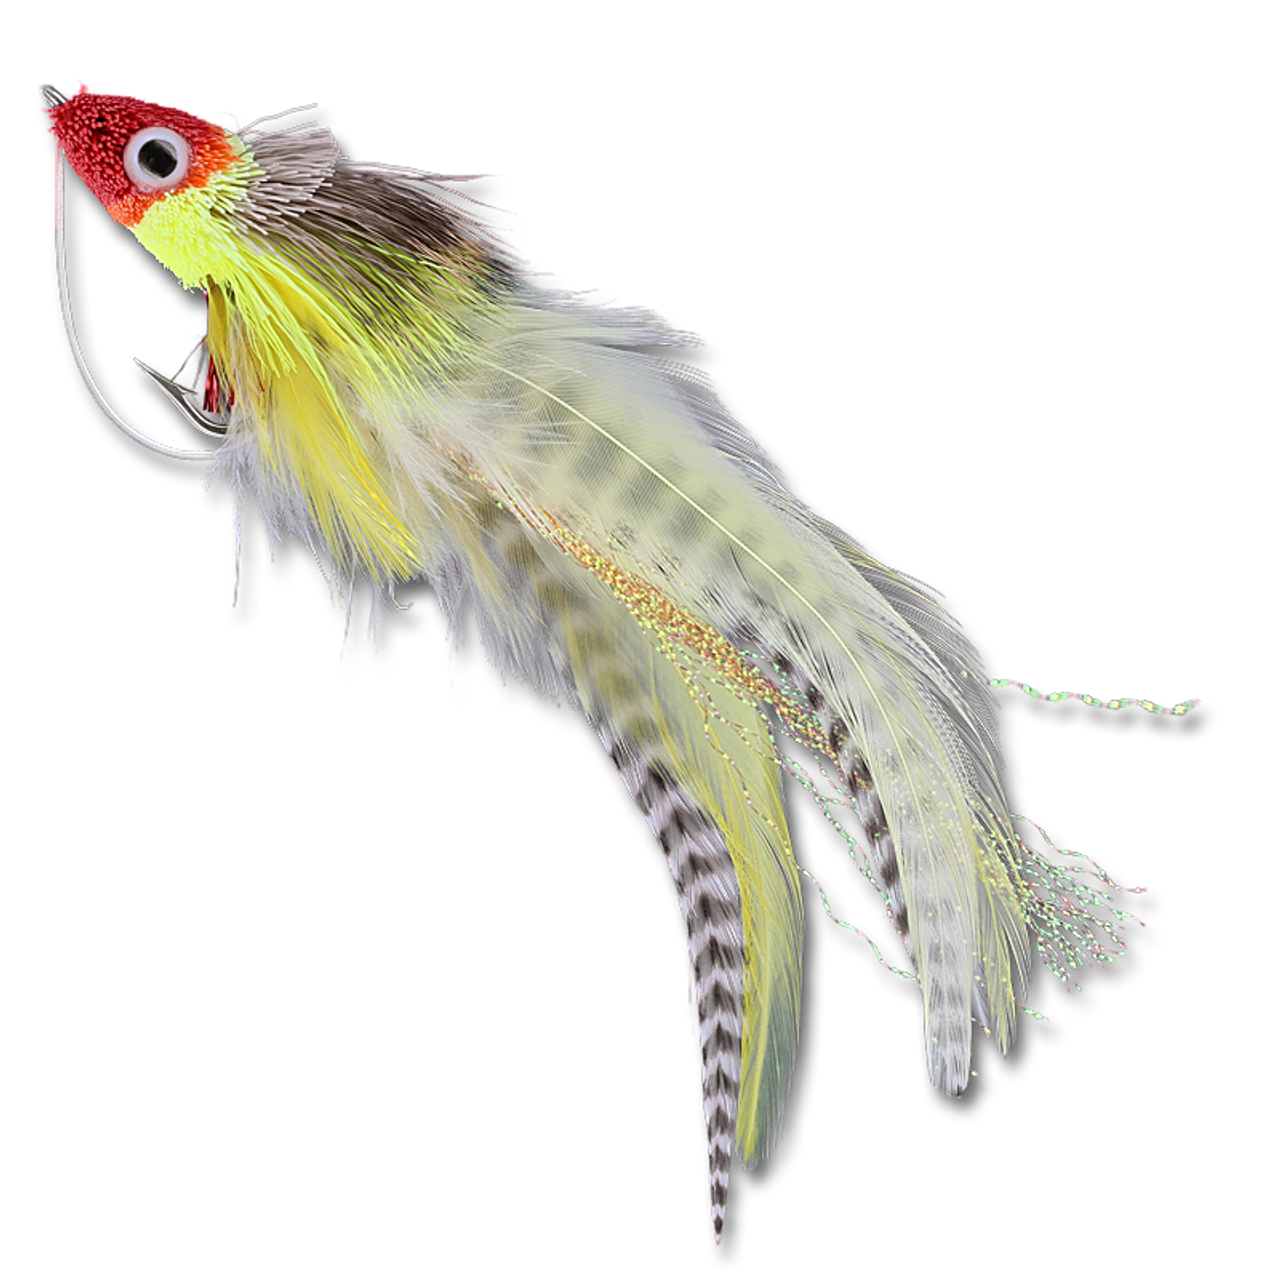 Whitlock's Swimming Baitfish at The Fly Shop